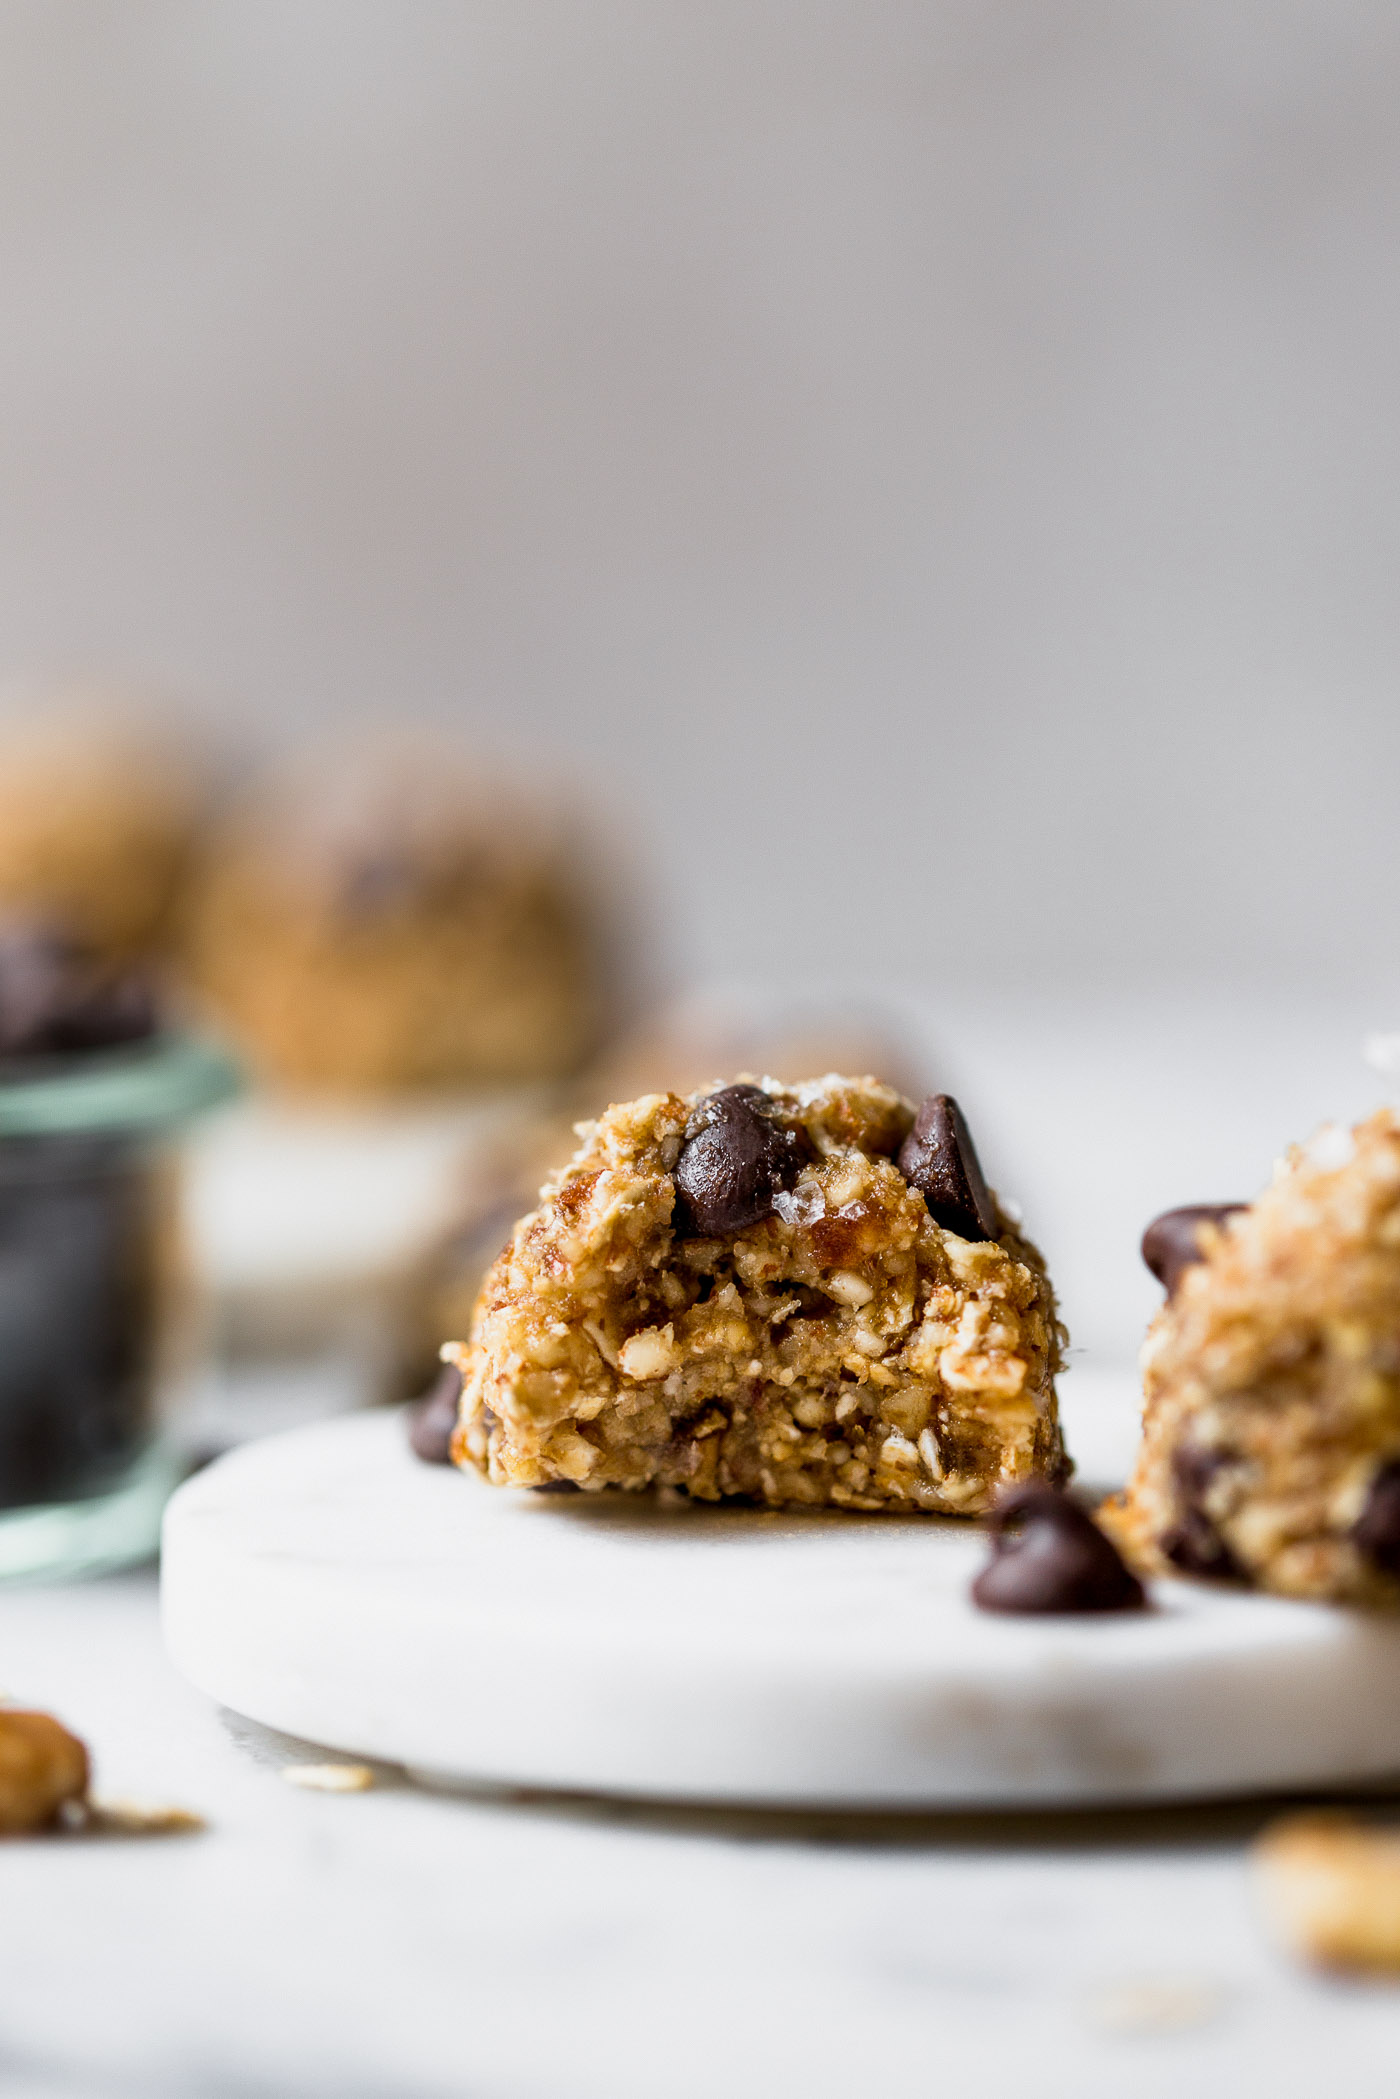 chocolate chip banana bread bliss balls are an easy & totally wholesome snack! inspired by chocolate chip banana bread, but in the form of a healthy, raw energy bite, these chocolate chip banana bread bliss balls are loaded with dates, cashews, almonds, walnuts, and banana. #playswellwithbutter #blissballs #energybites #healthysnack #healthydessert #healthyrecipe #bananabreadbites #bananabread